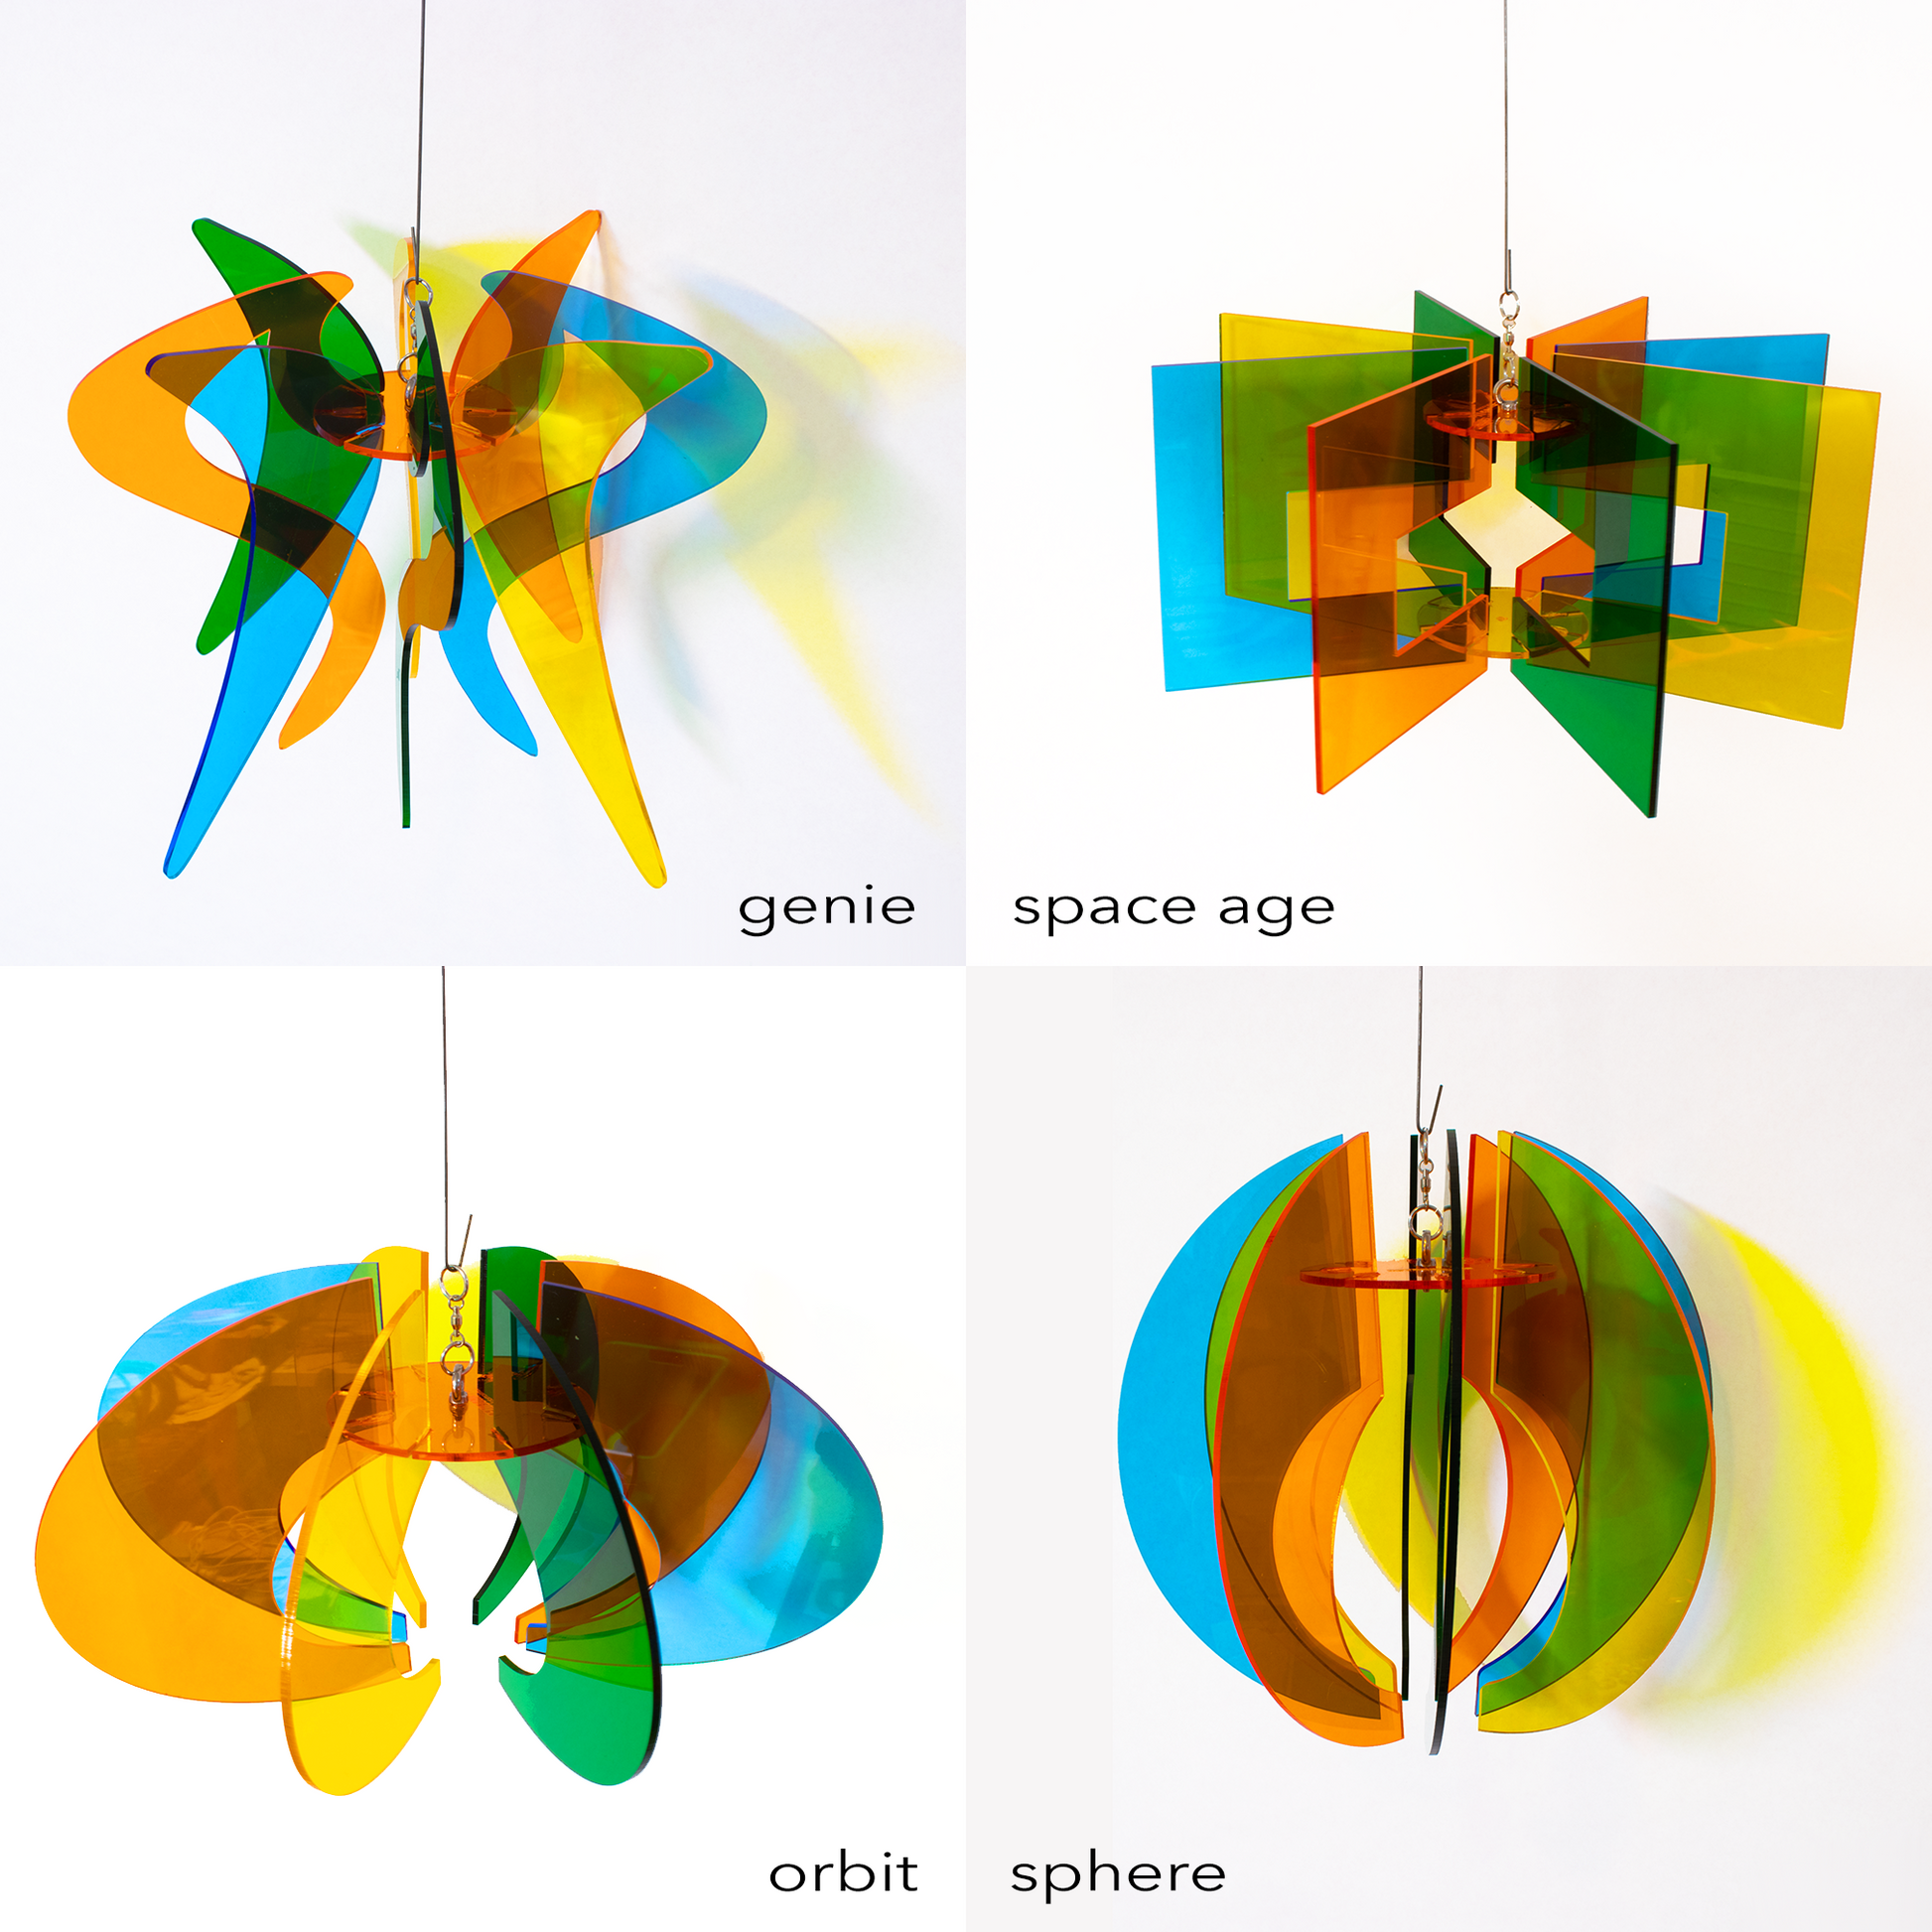 Beautiful clear acrylic plexiglass hanging art mobiles - RotaMobiles - 4 Styles in Clear Orange, Clear Yellow, Clear Blue, and Clear Green - kinetic retro mid century modern art by AtomicMobiles.com